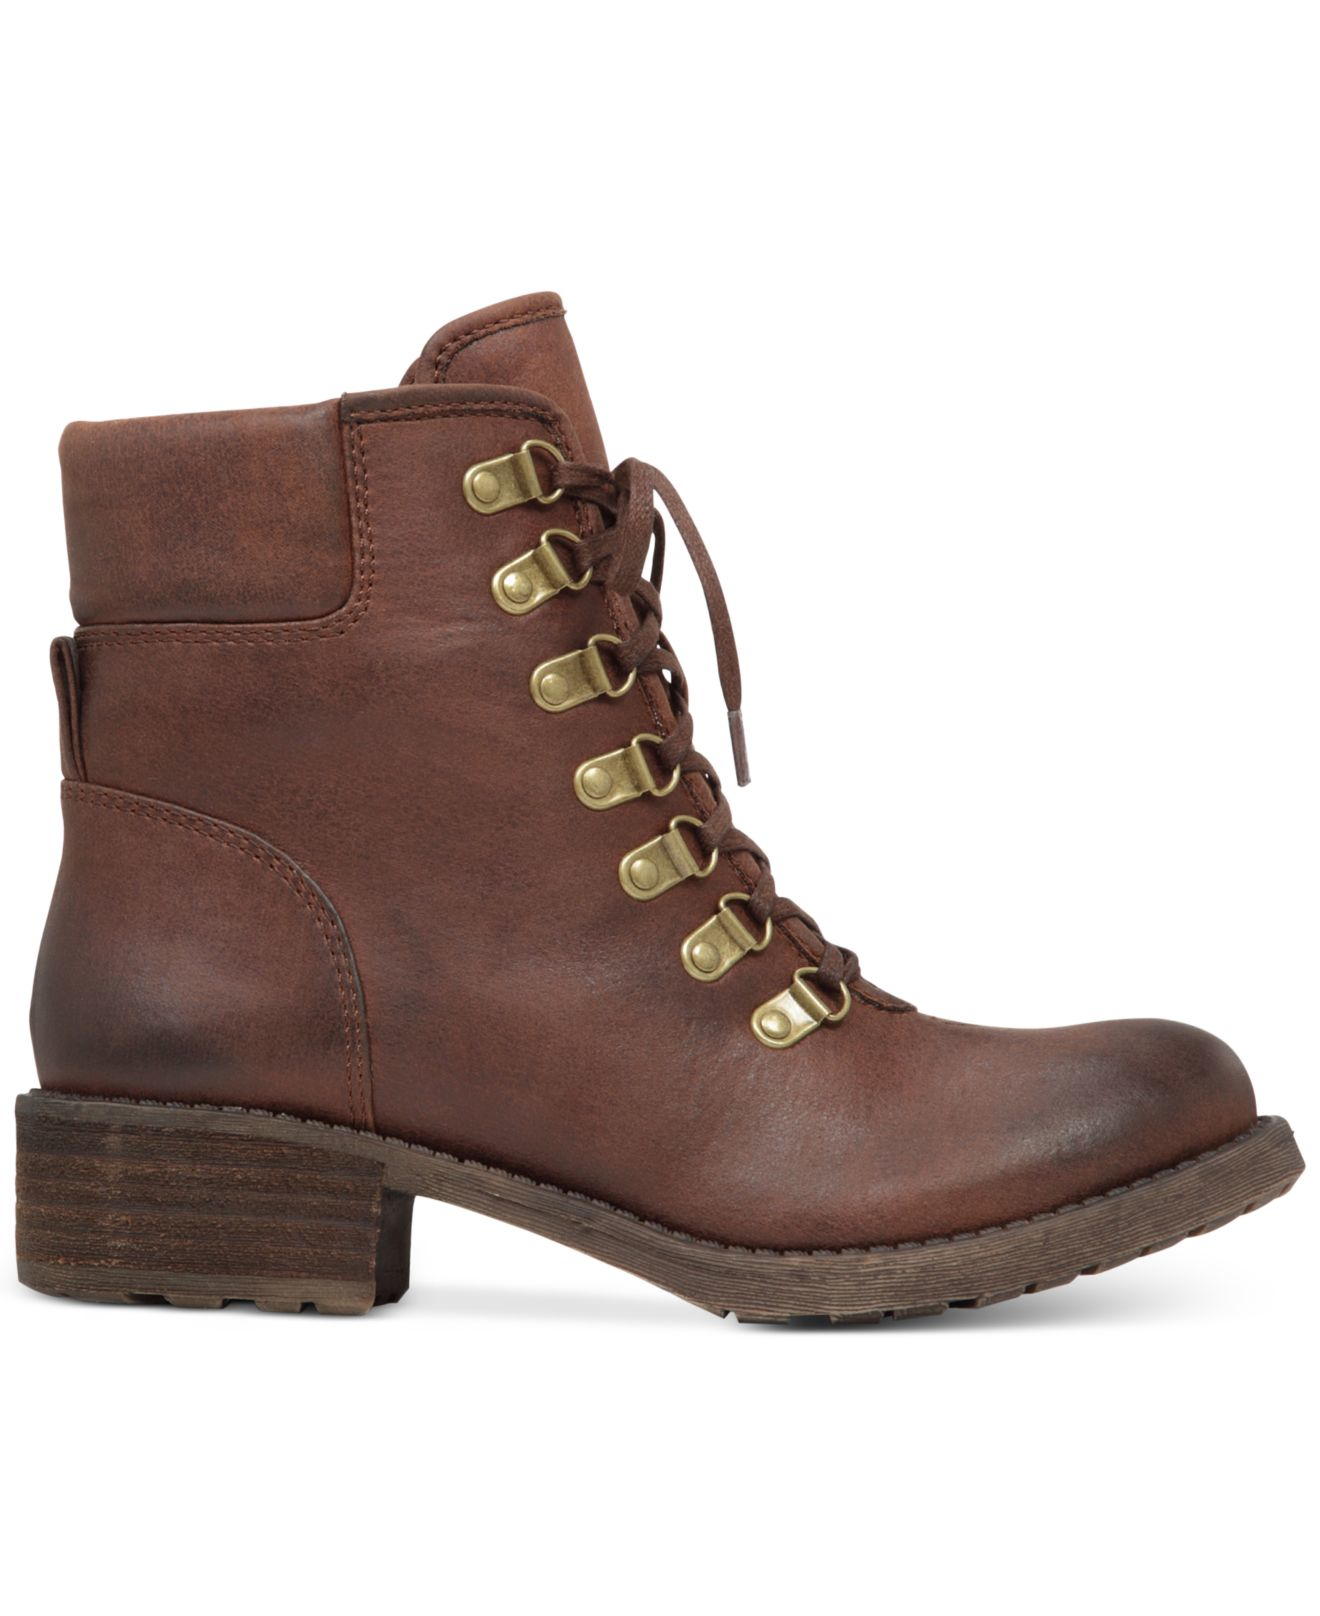 Lucky Brand Leather Women's Daxxter Lace-up Boots in Brown - Lyst